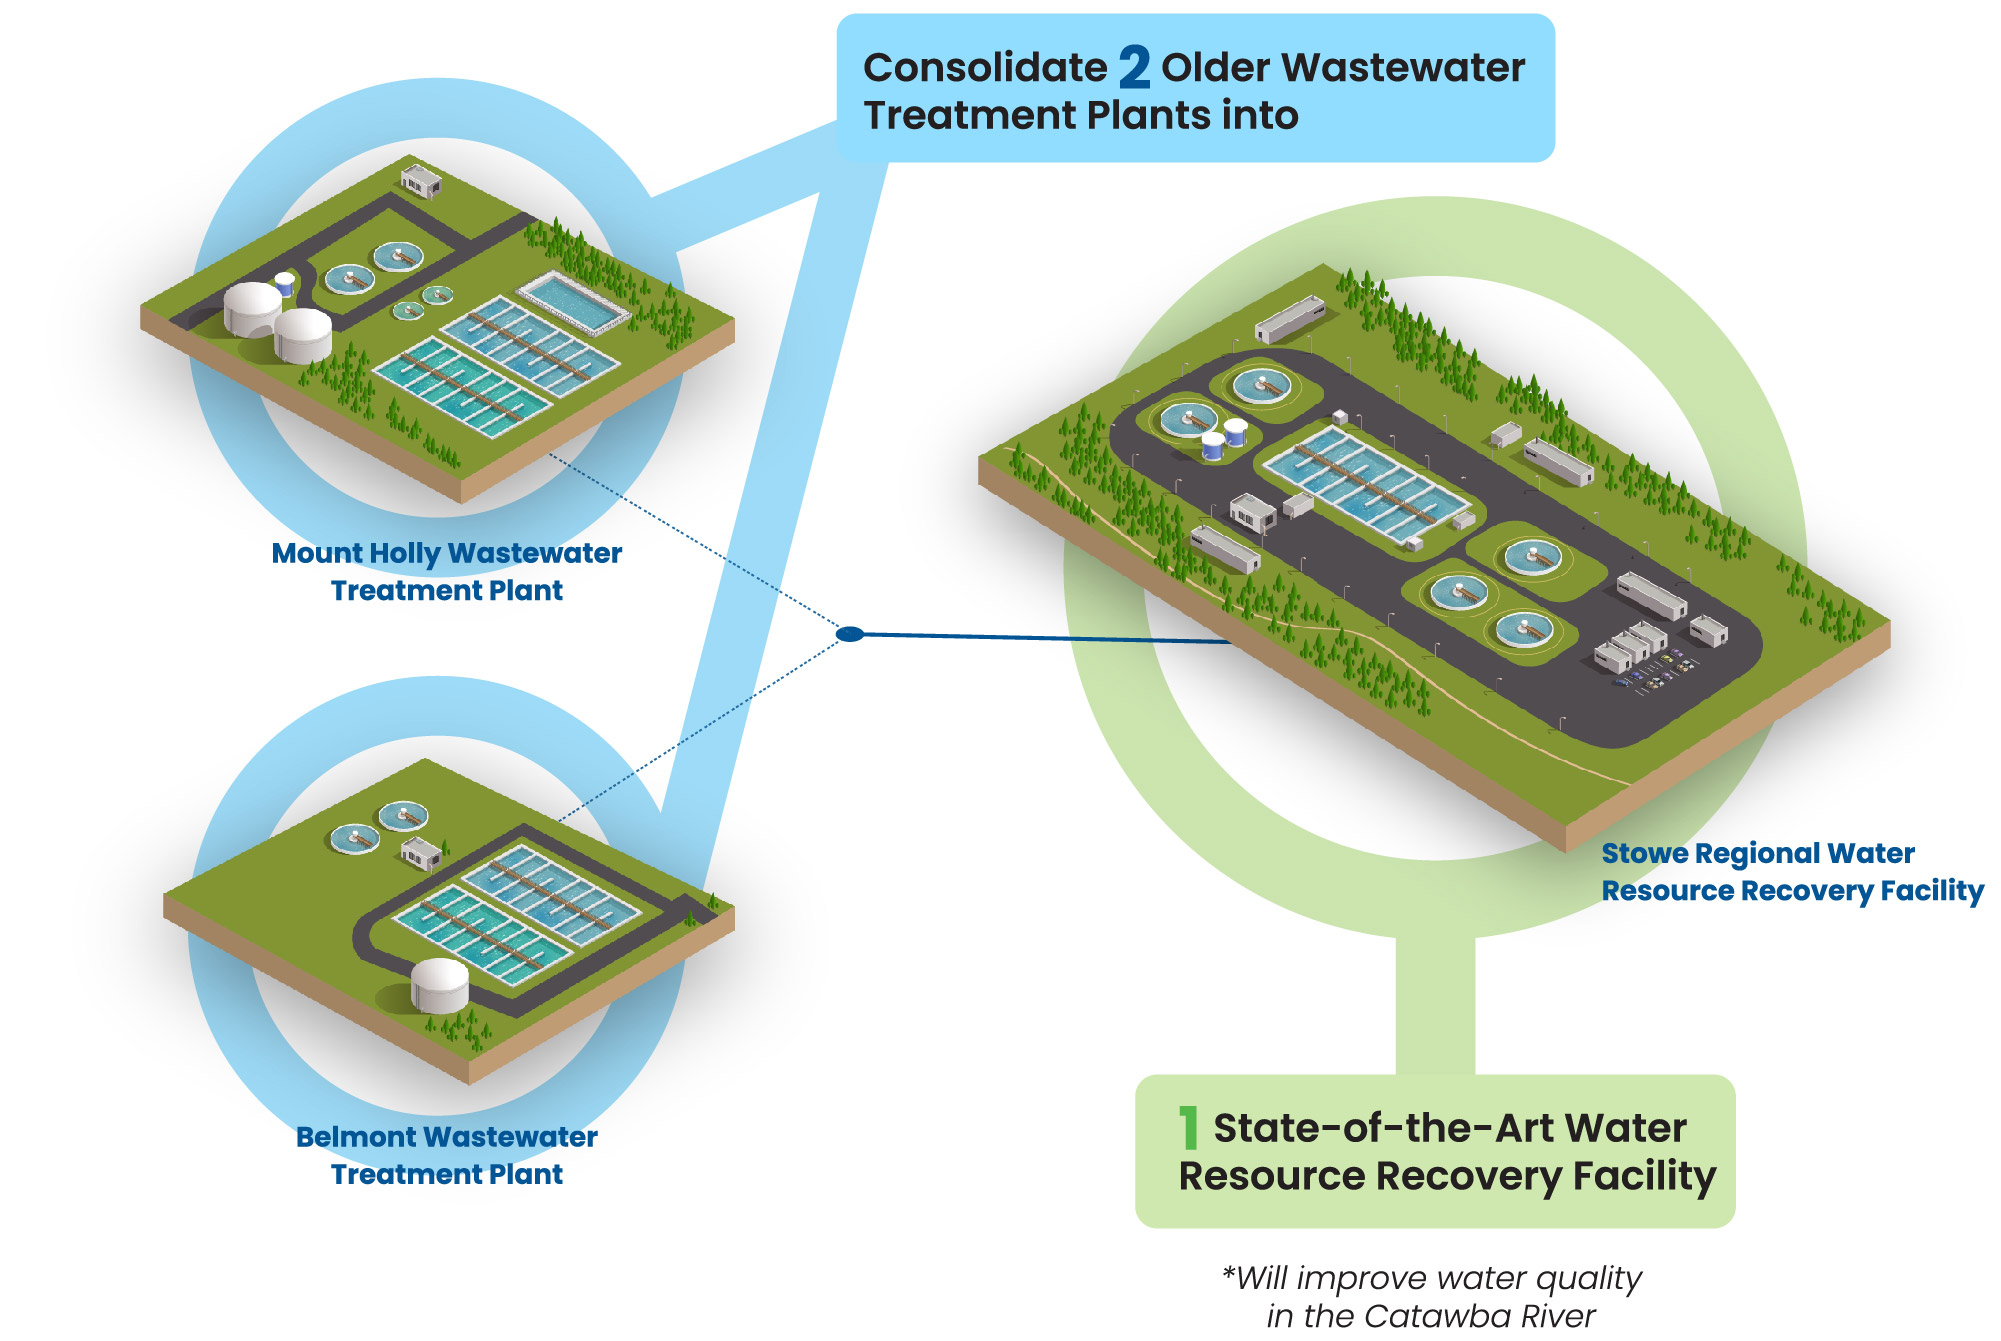 Illustrated Graphic showing the consolidation of two older wasterwater treatment plants into one state-of-the-art water resource recovery facility.